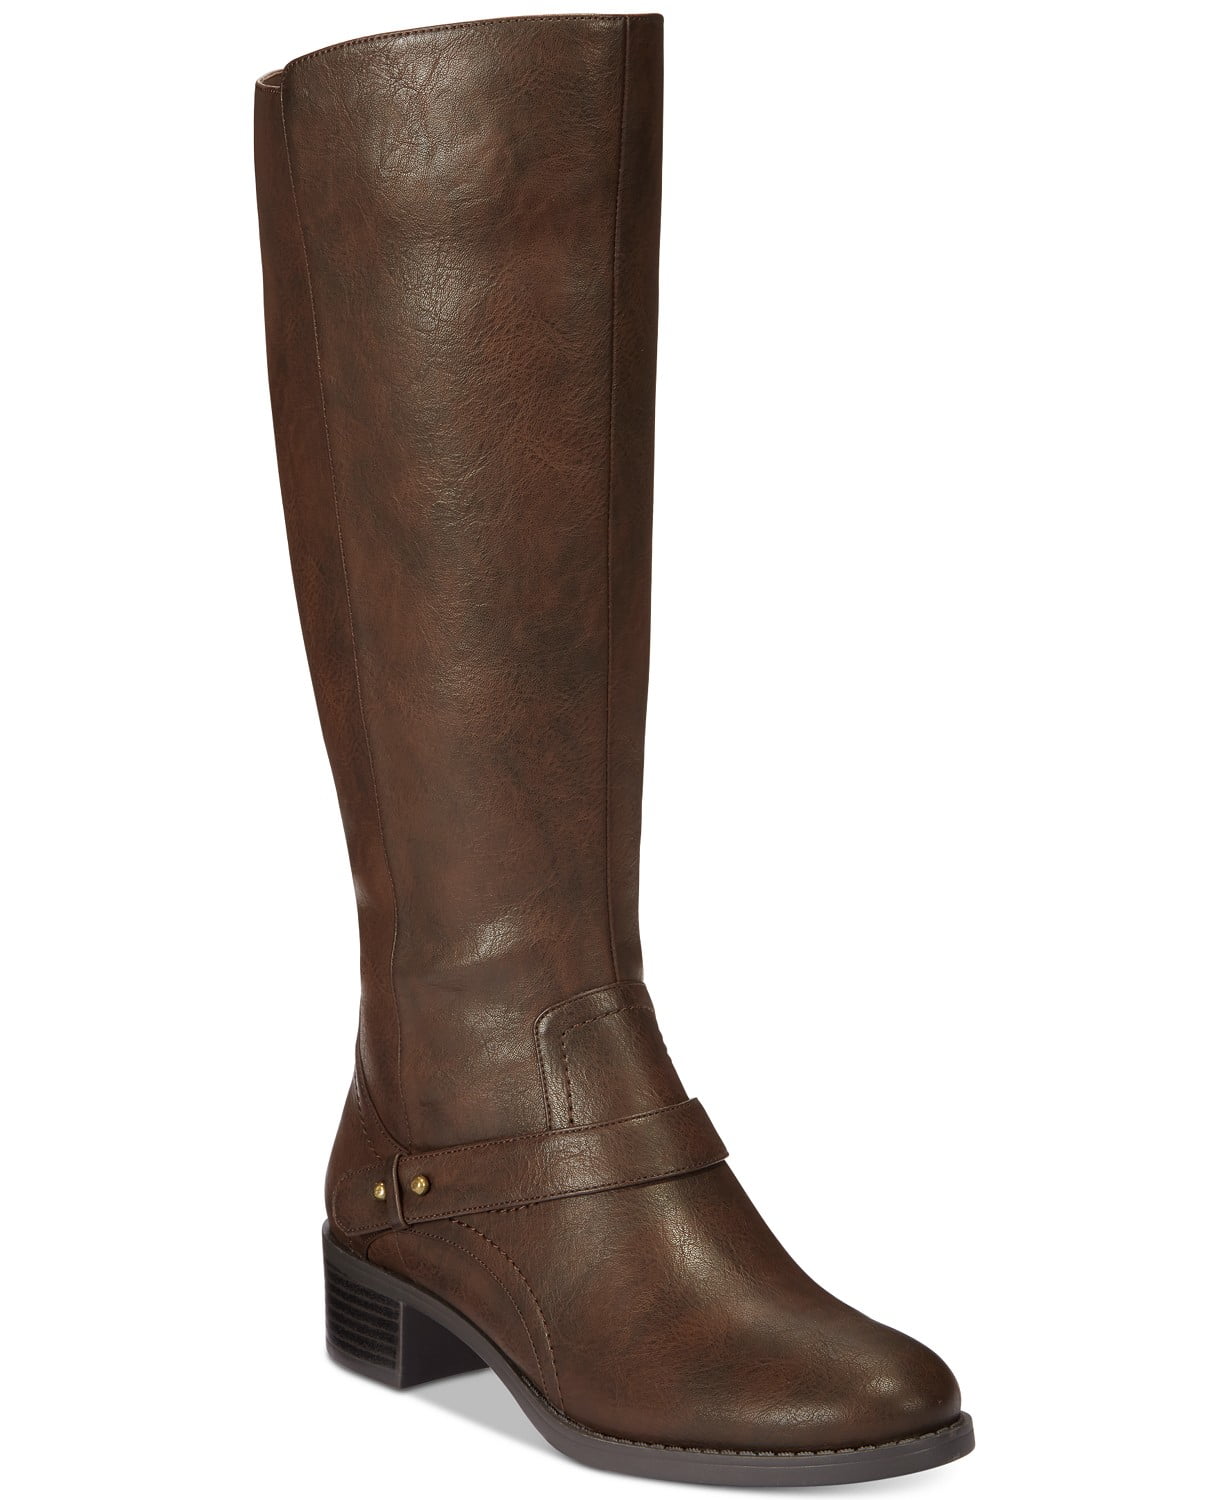 www.couturepoint.com-easy-street-womens-brown-jewel-riding-boots